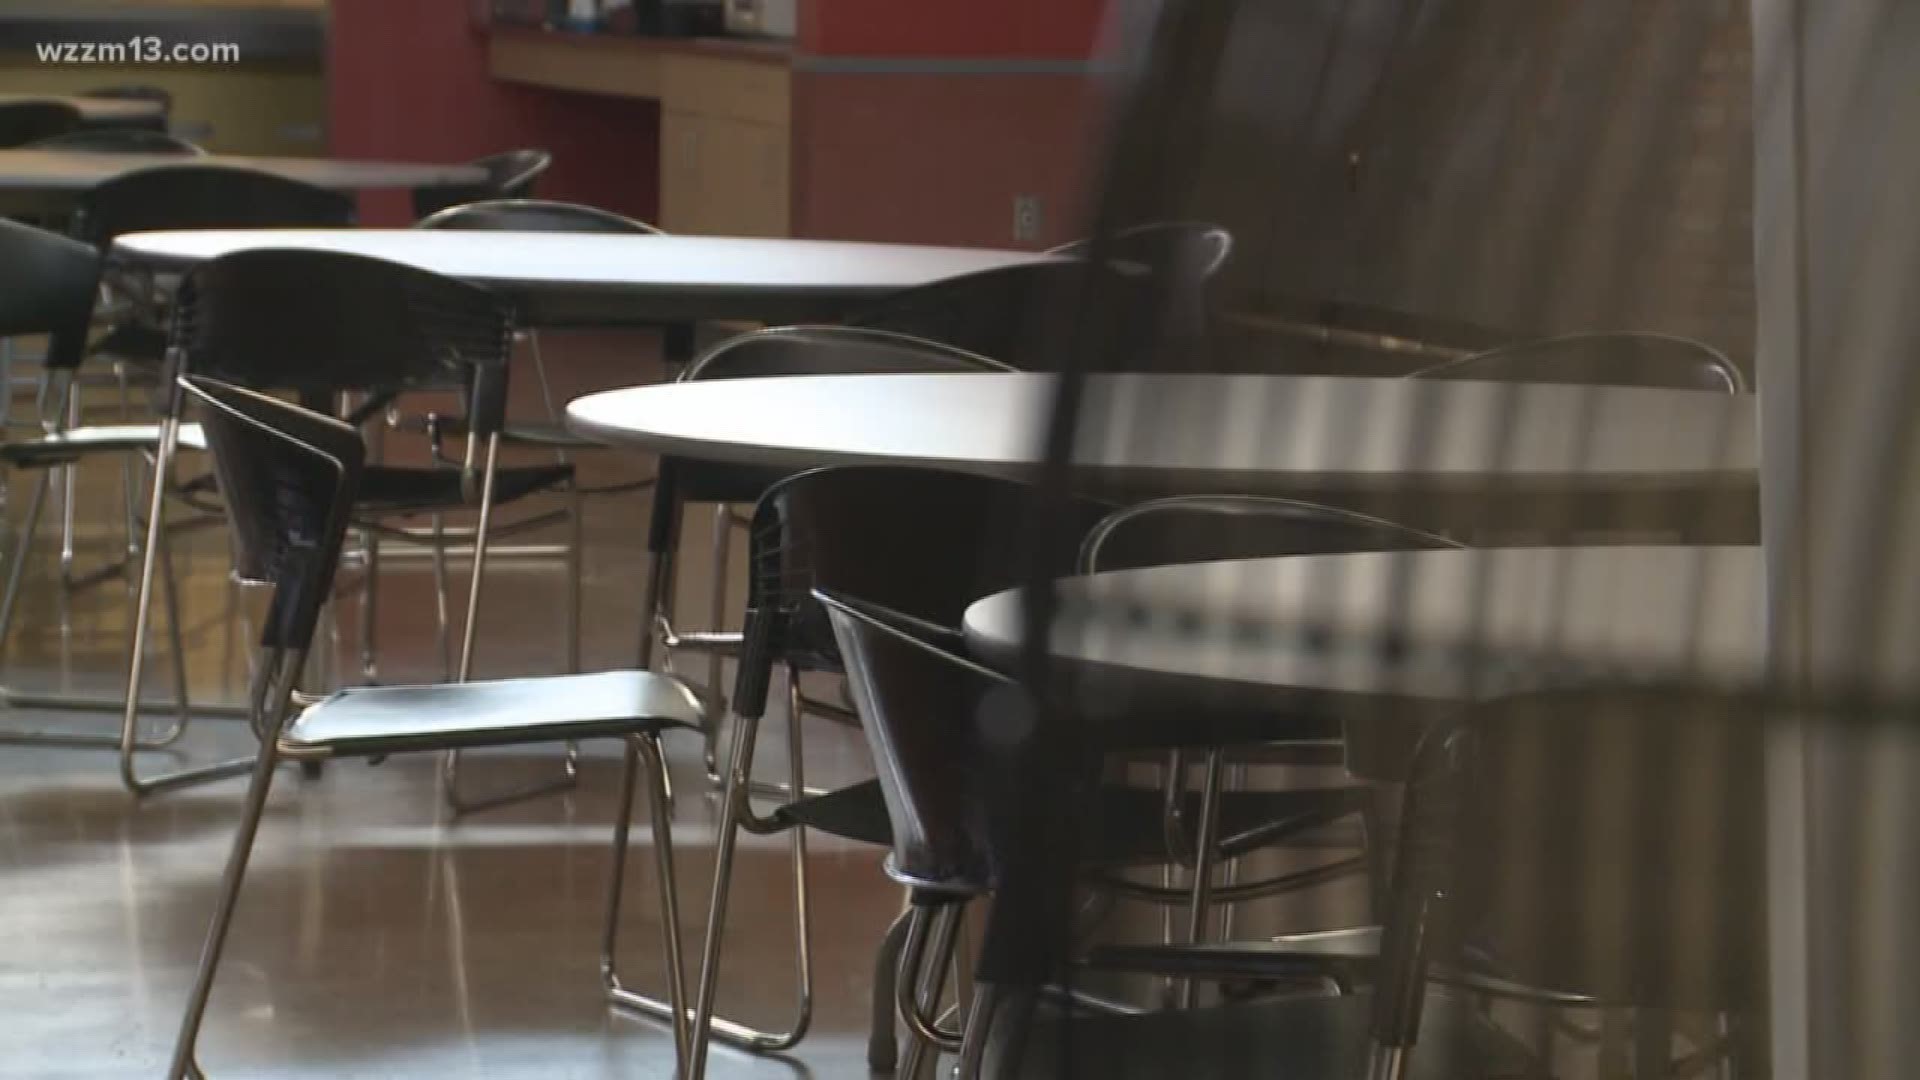 Grand Rapids students to return early